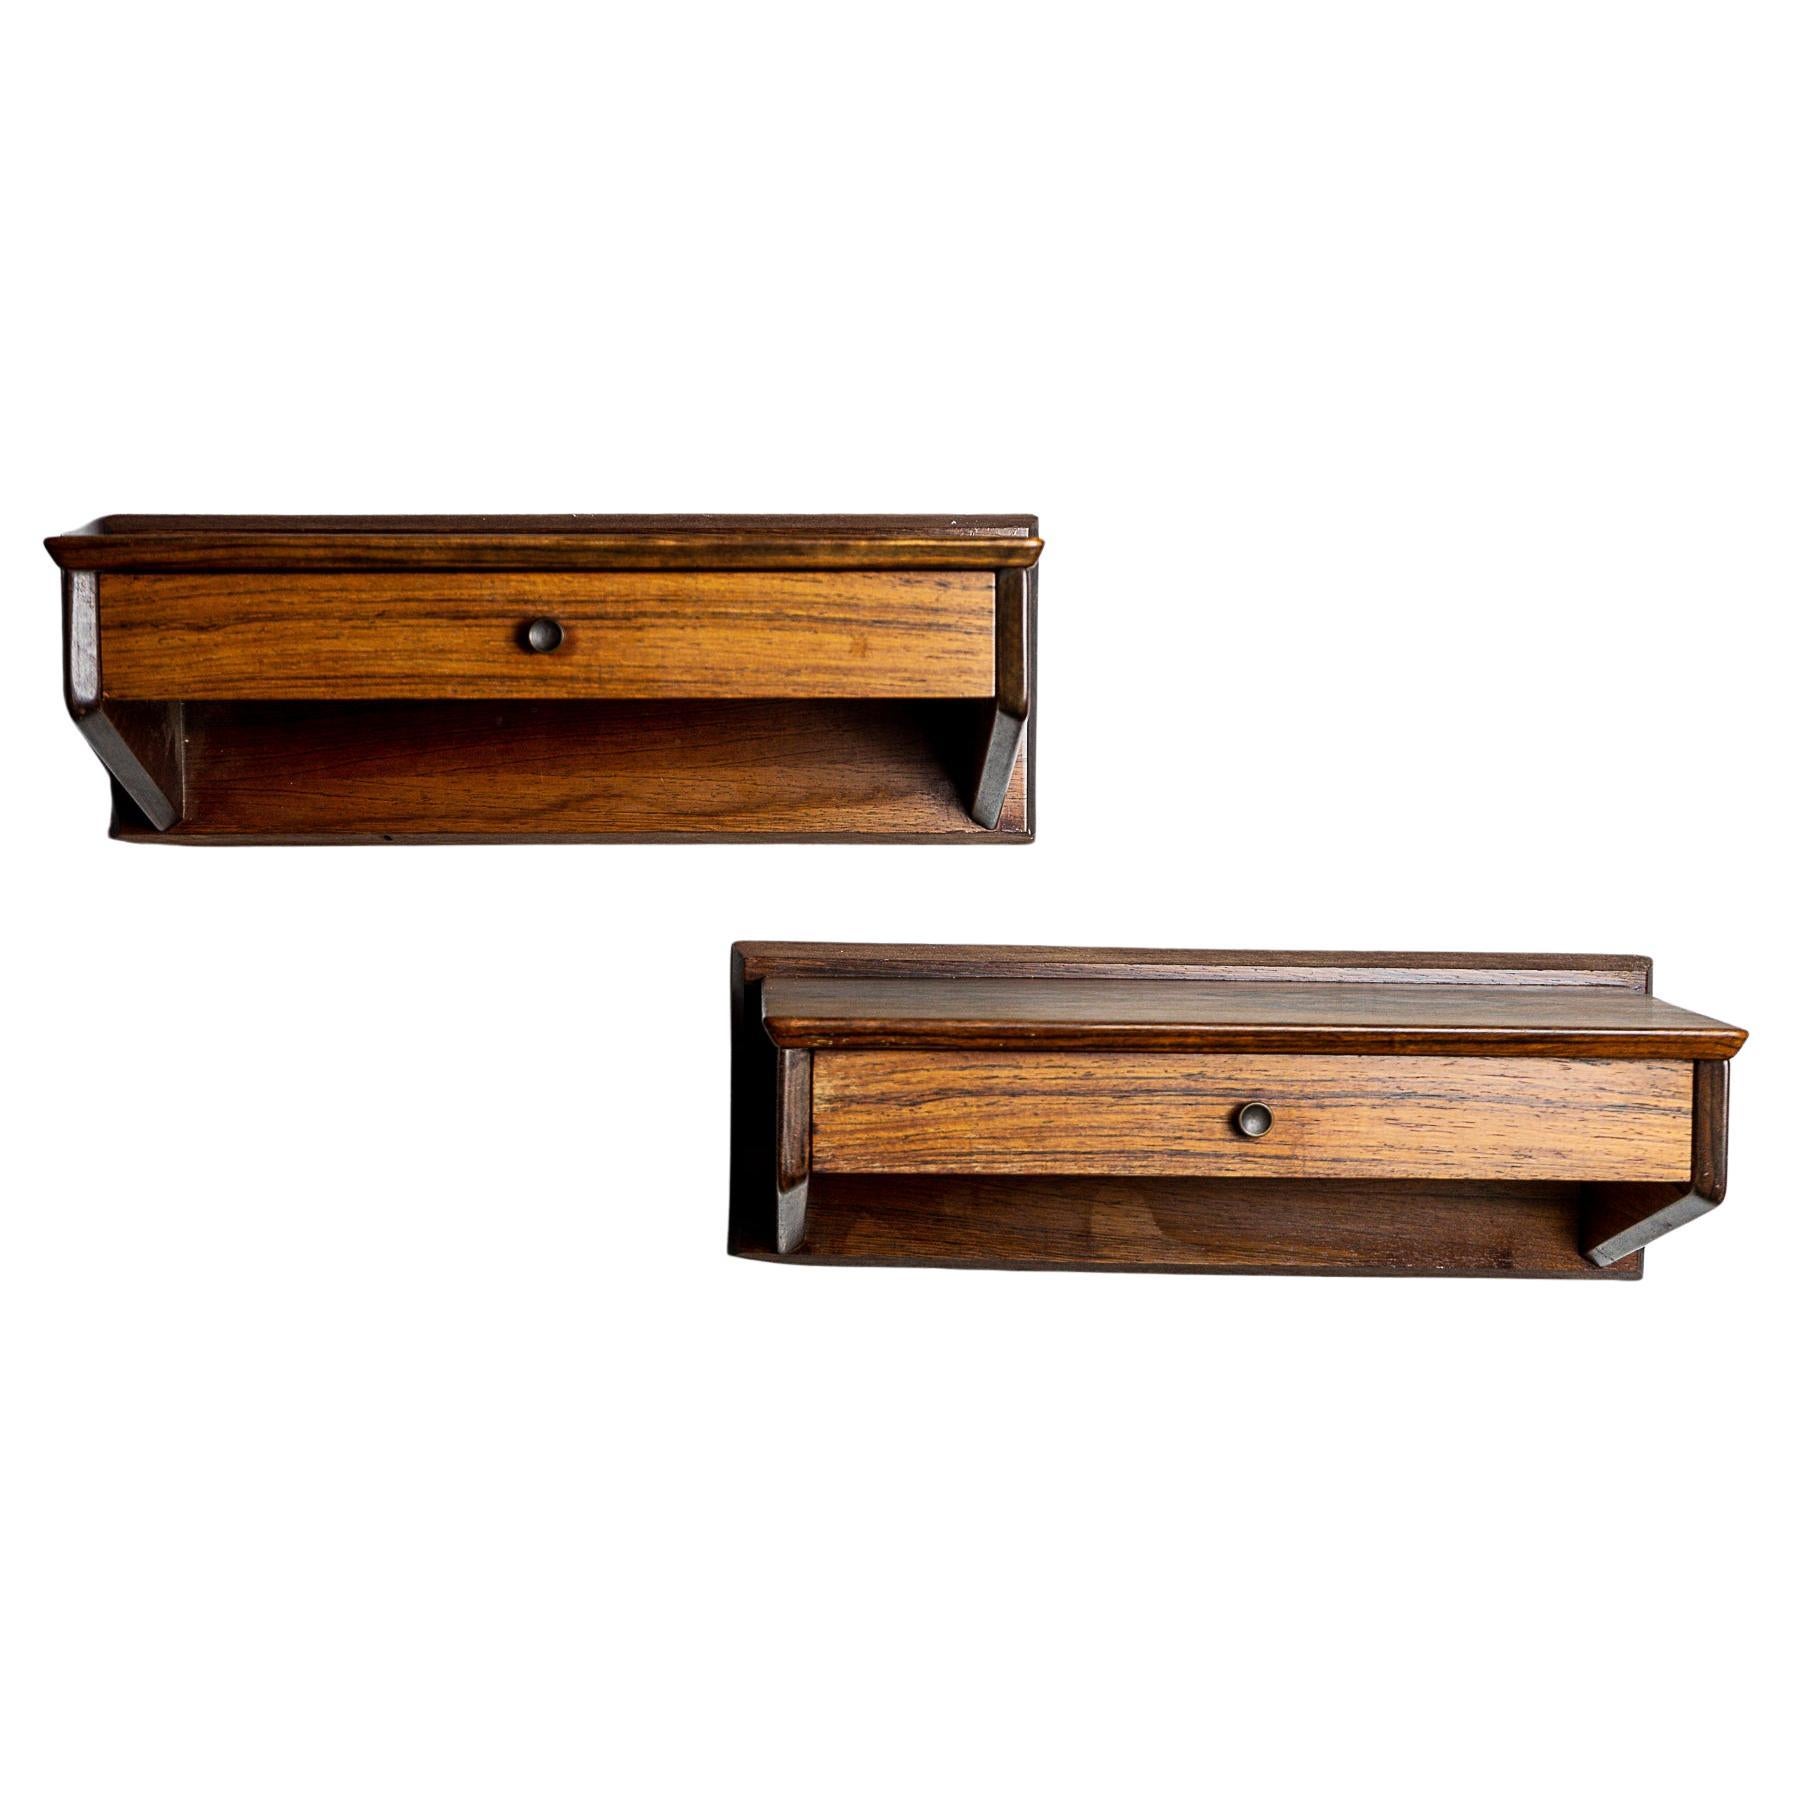 Pair of Danish Mid-Century Modern Rosewood Floating Bedsides / Nightstands